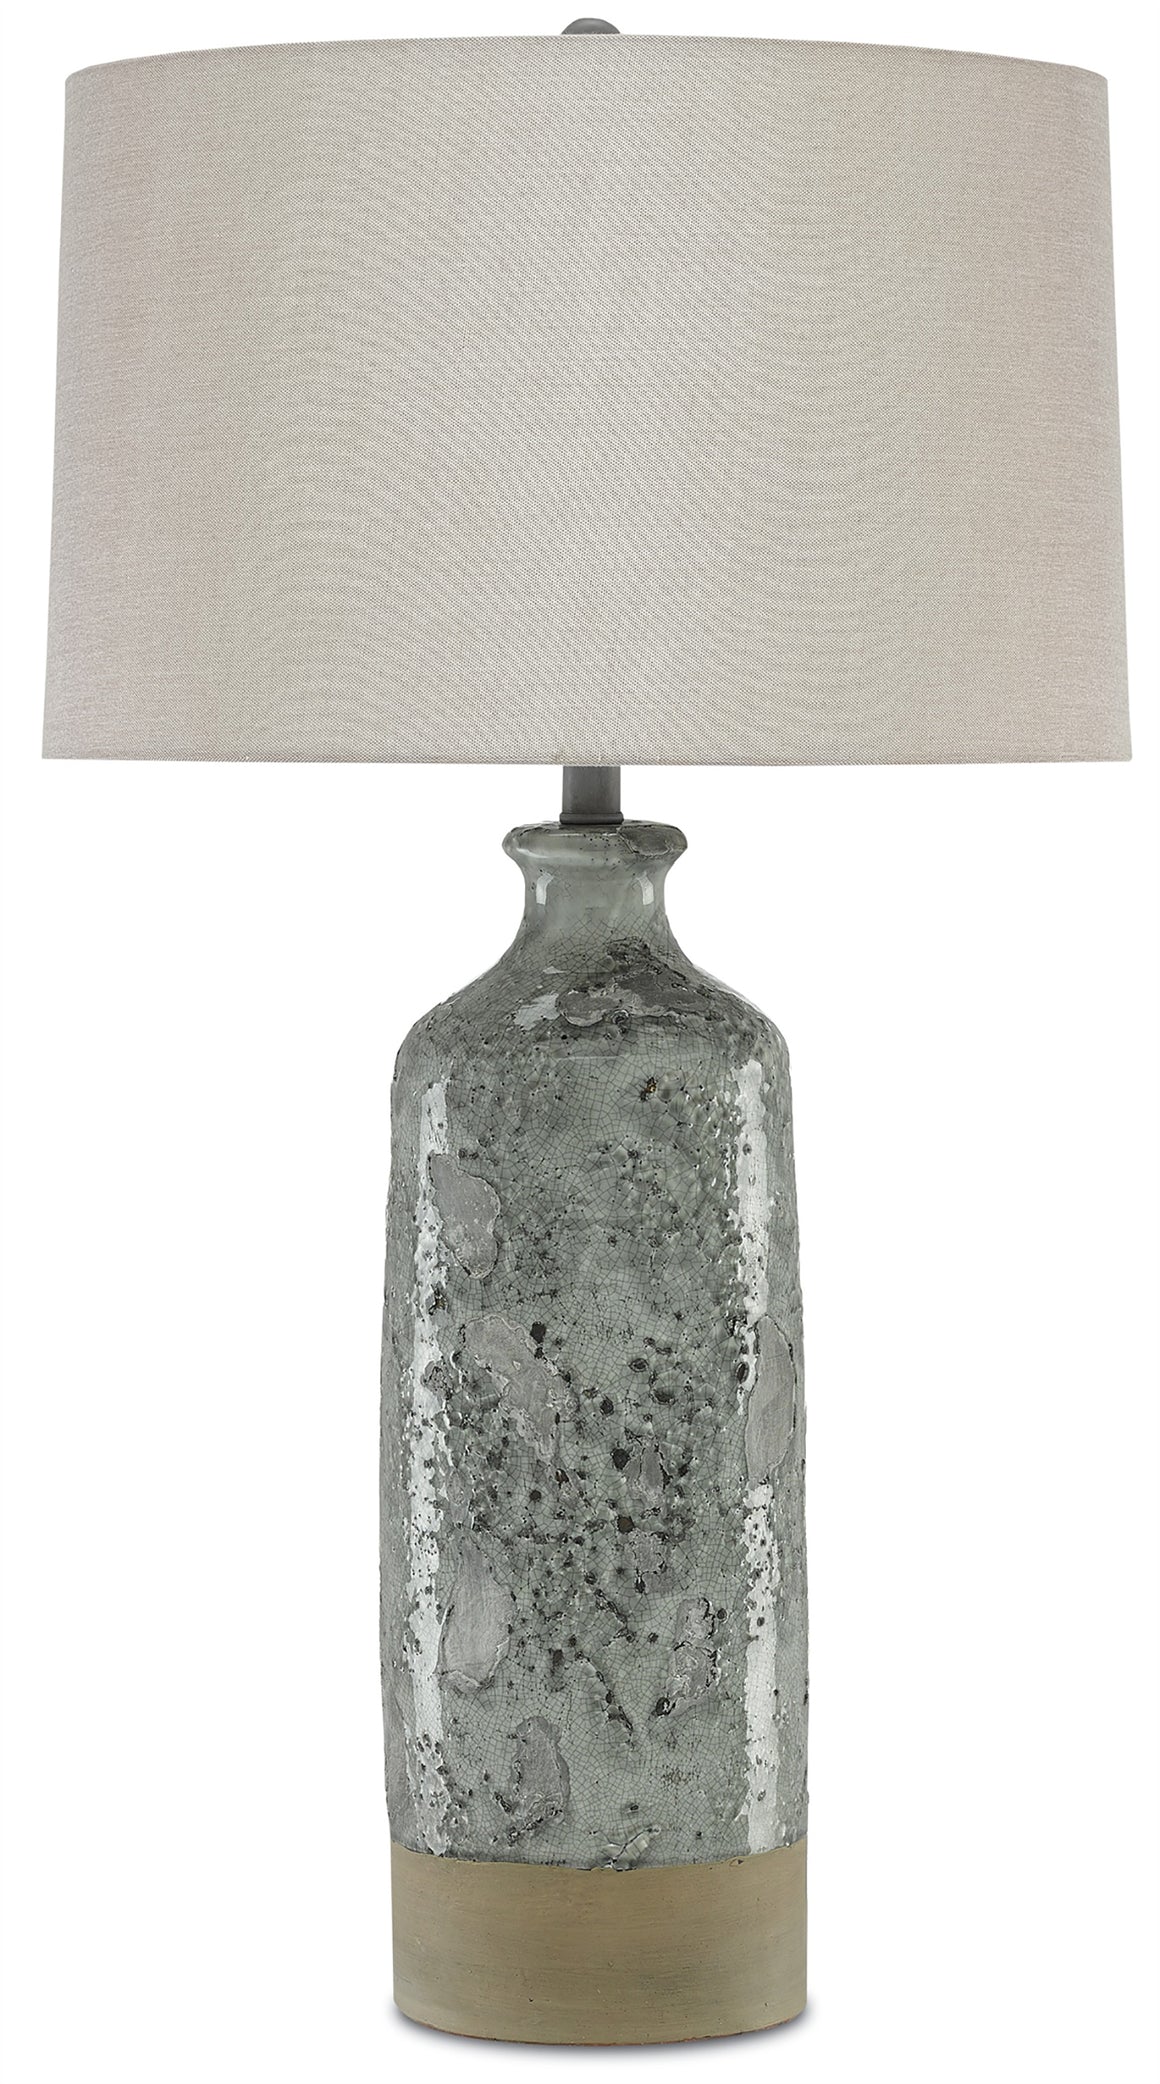 Currey and Company Stargazer Table Lamp